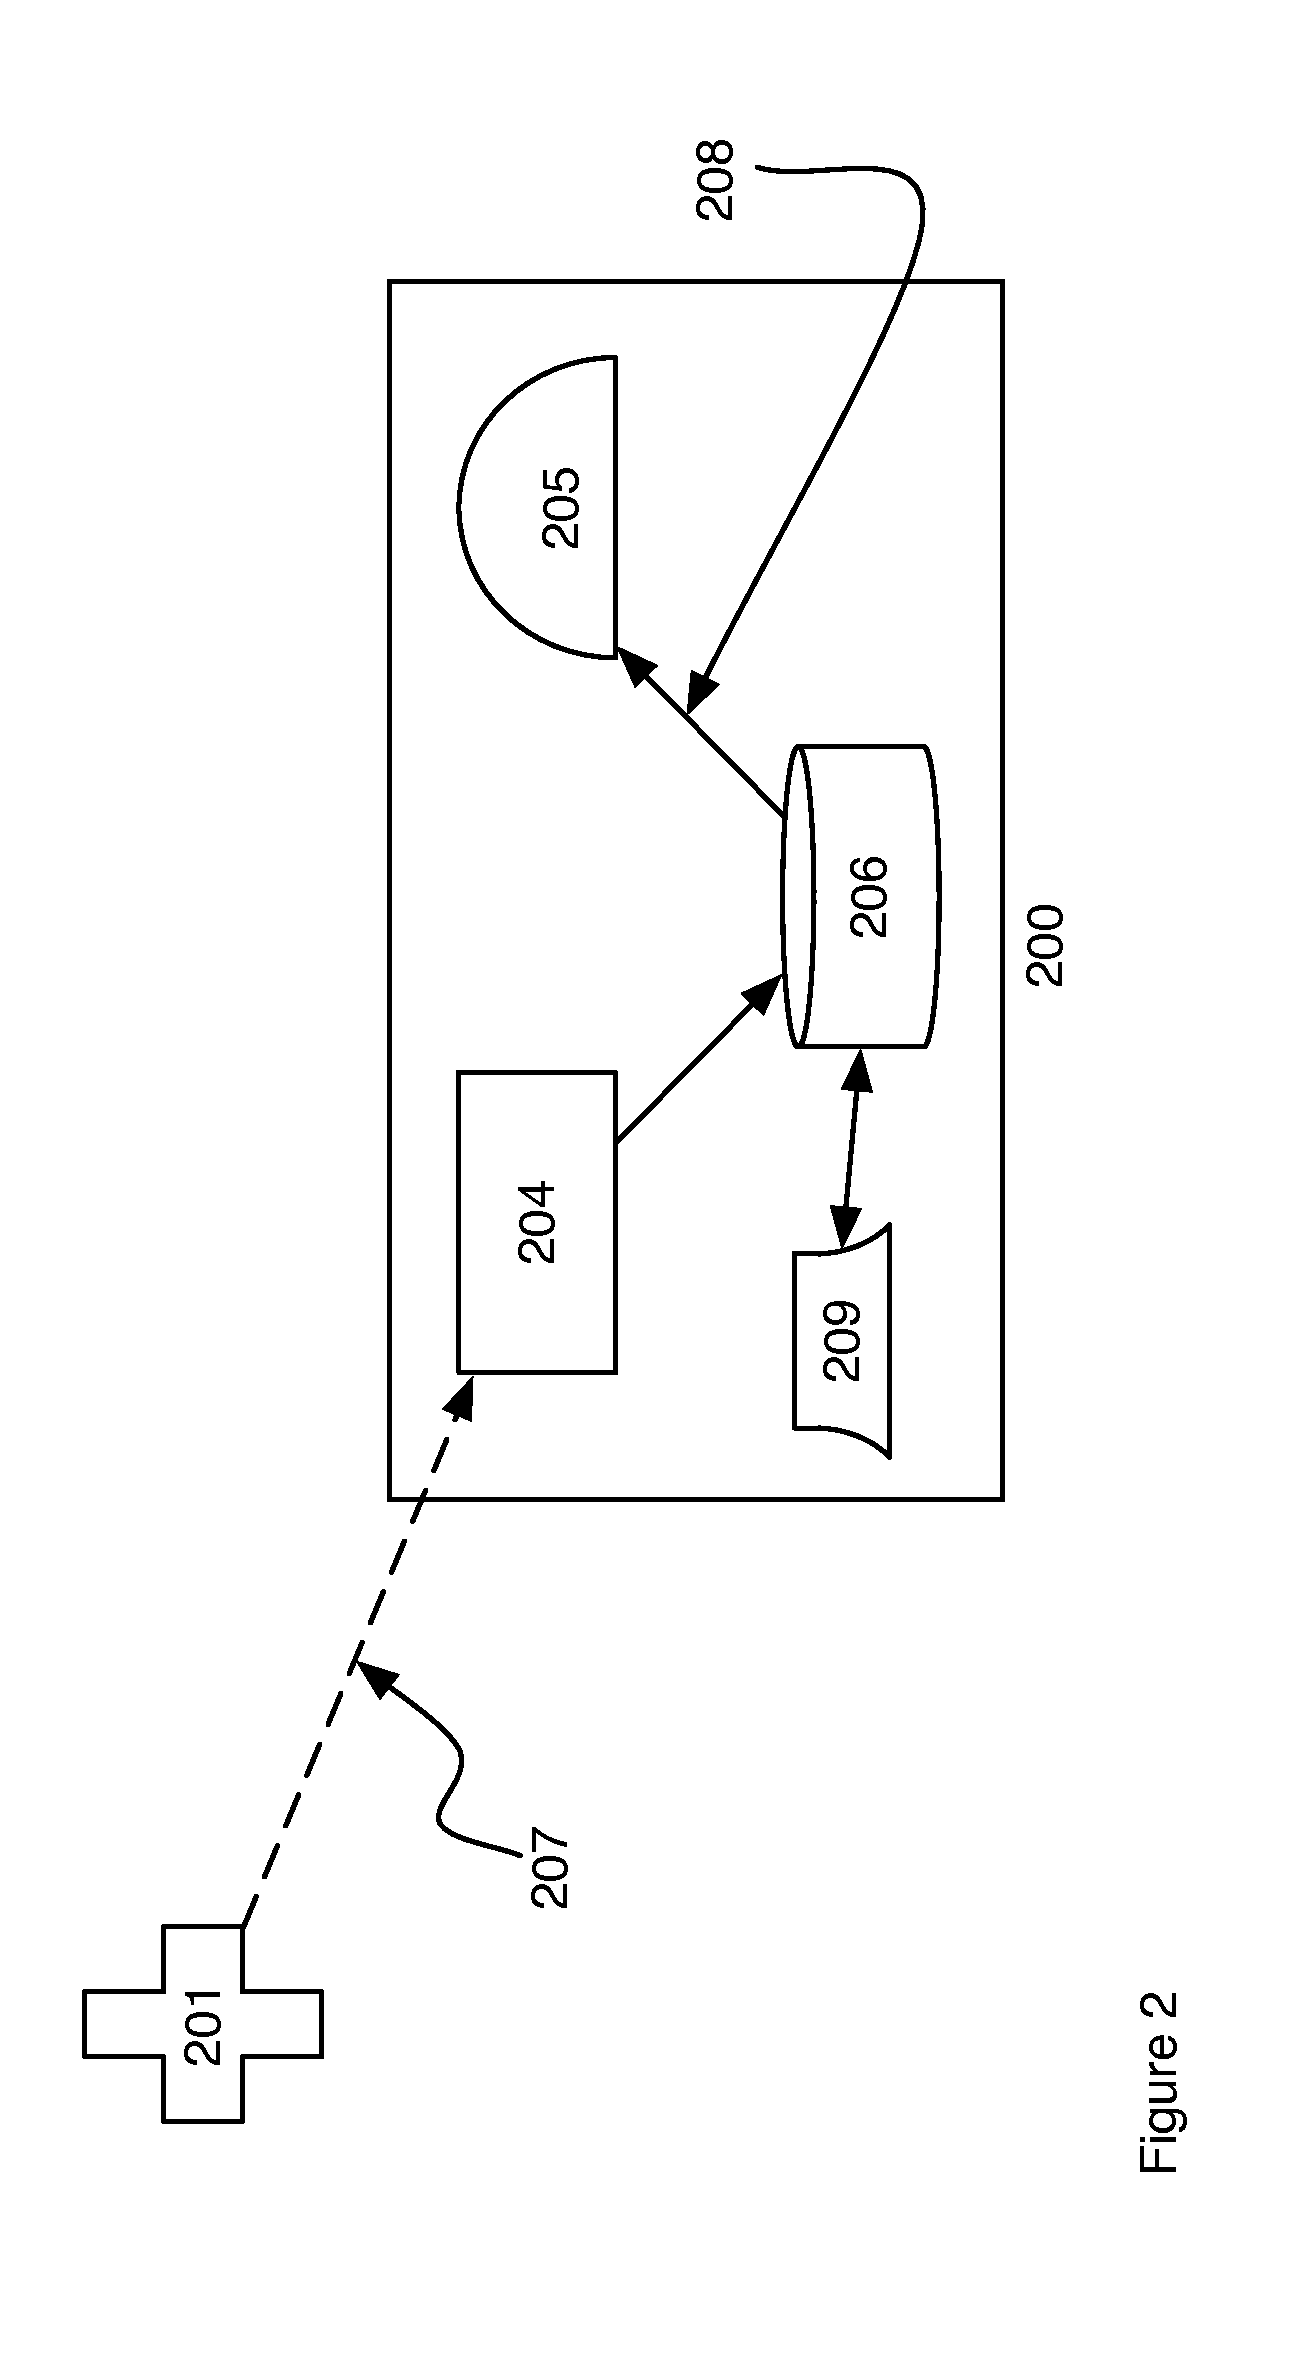 Method and Apparatus for Advanced Intelligent Transportation Systems